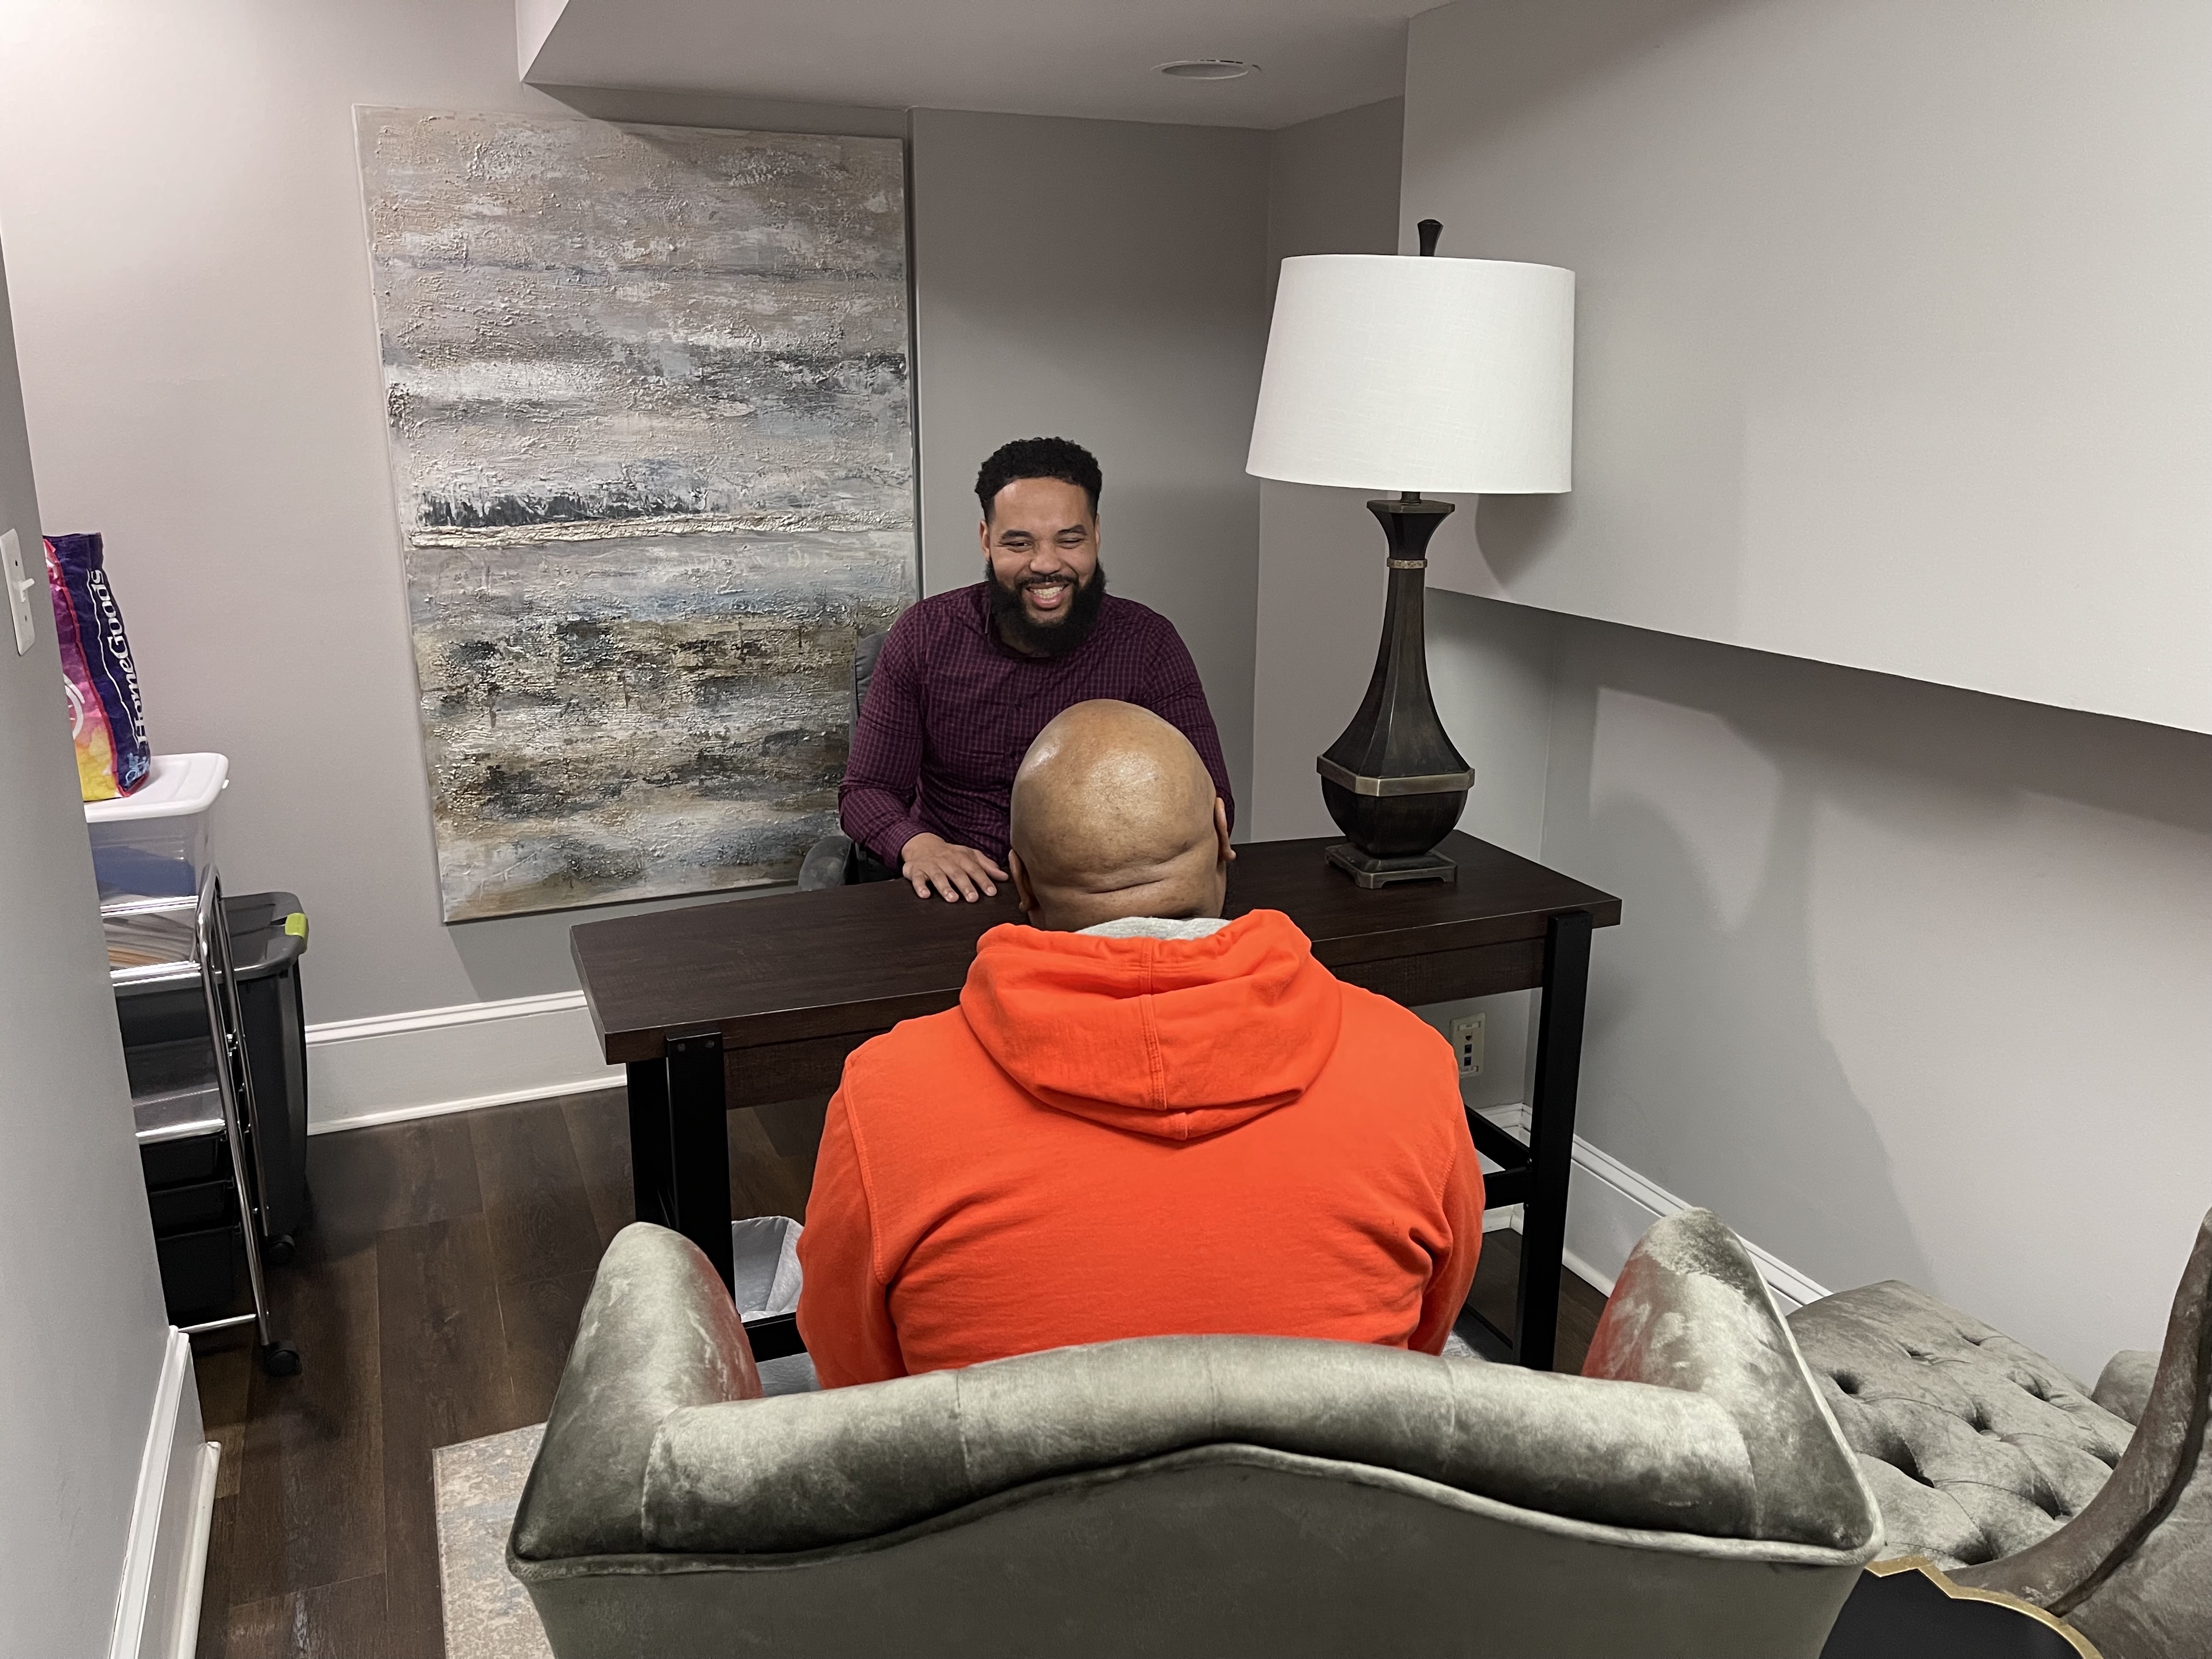 1)	Mario Broussard, licensed clinical social worker, is lead counselor for the resource center arm of the Capitol Hill Counseling and Resource Center, also an urban center of influence; here, he's seated across from a client.